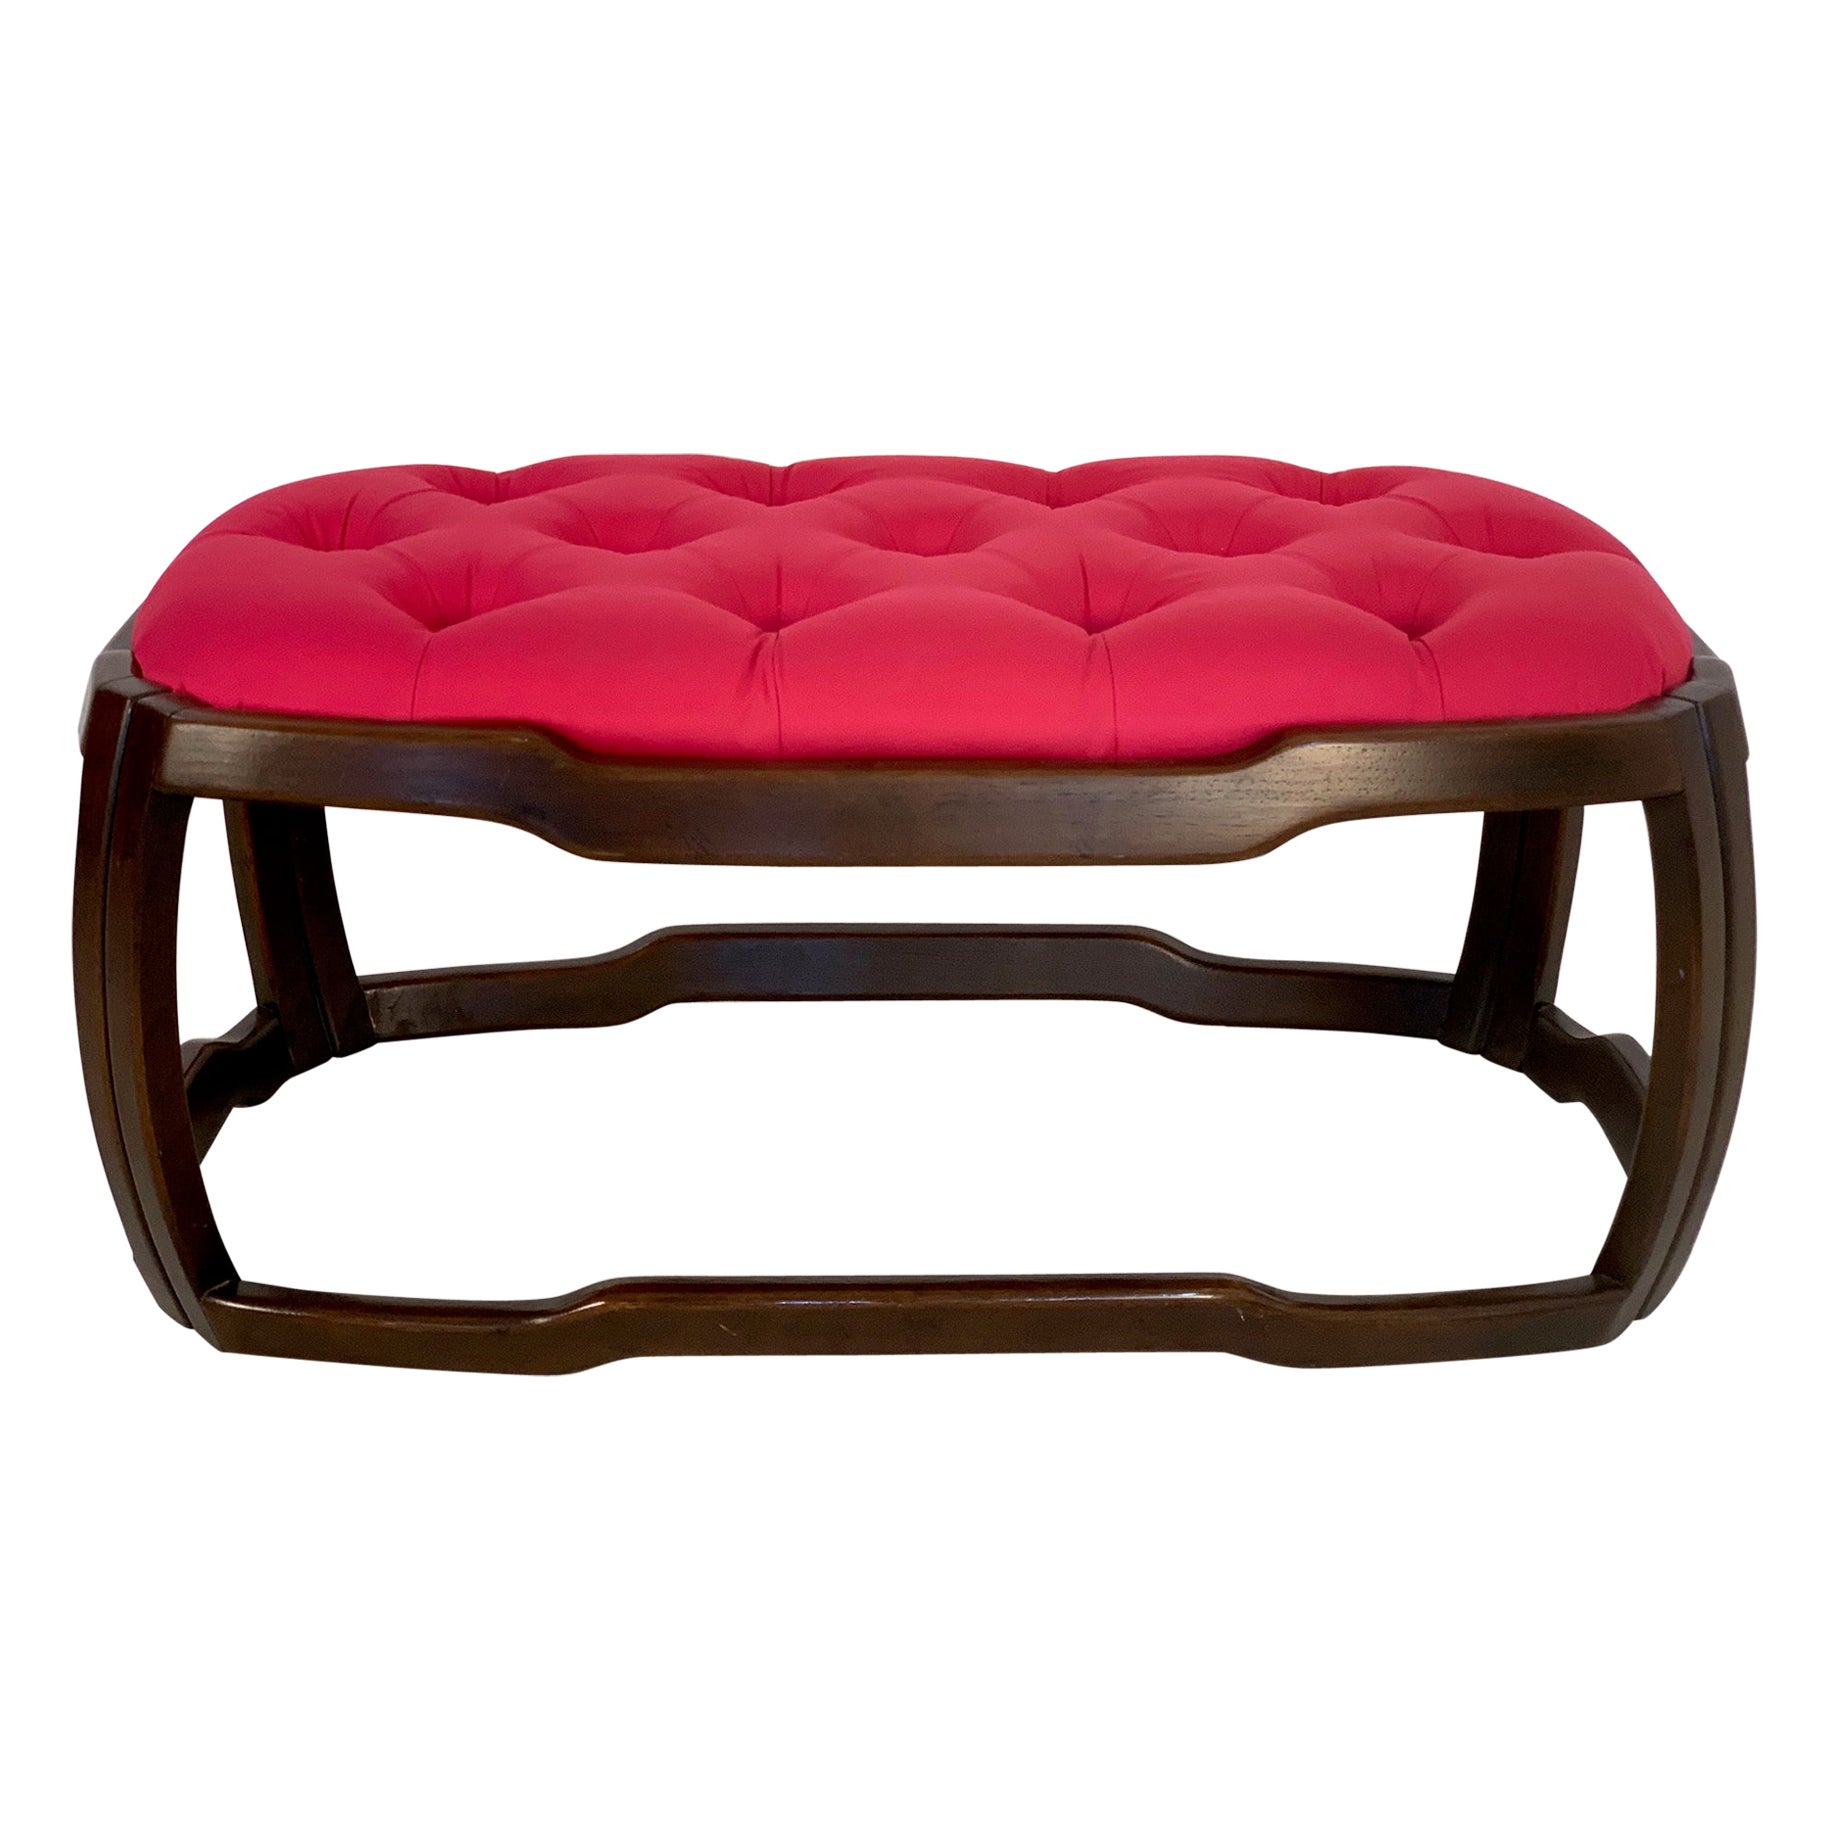 Mid-Century Modern Tufted Upholstered Bench For Sale